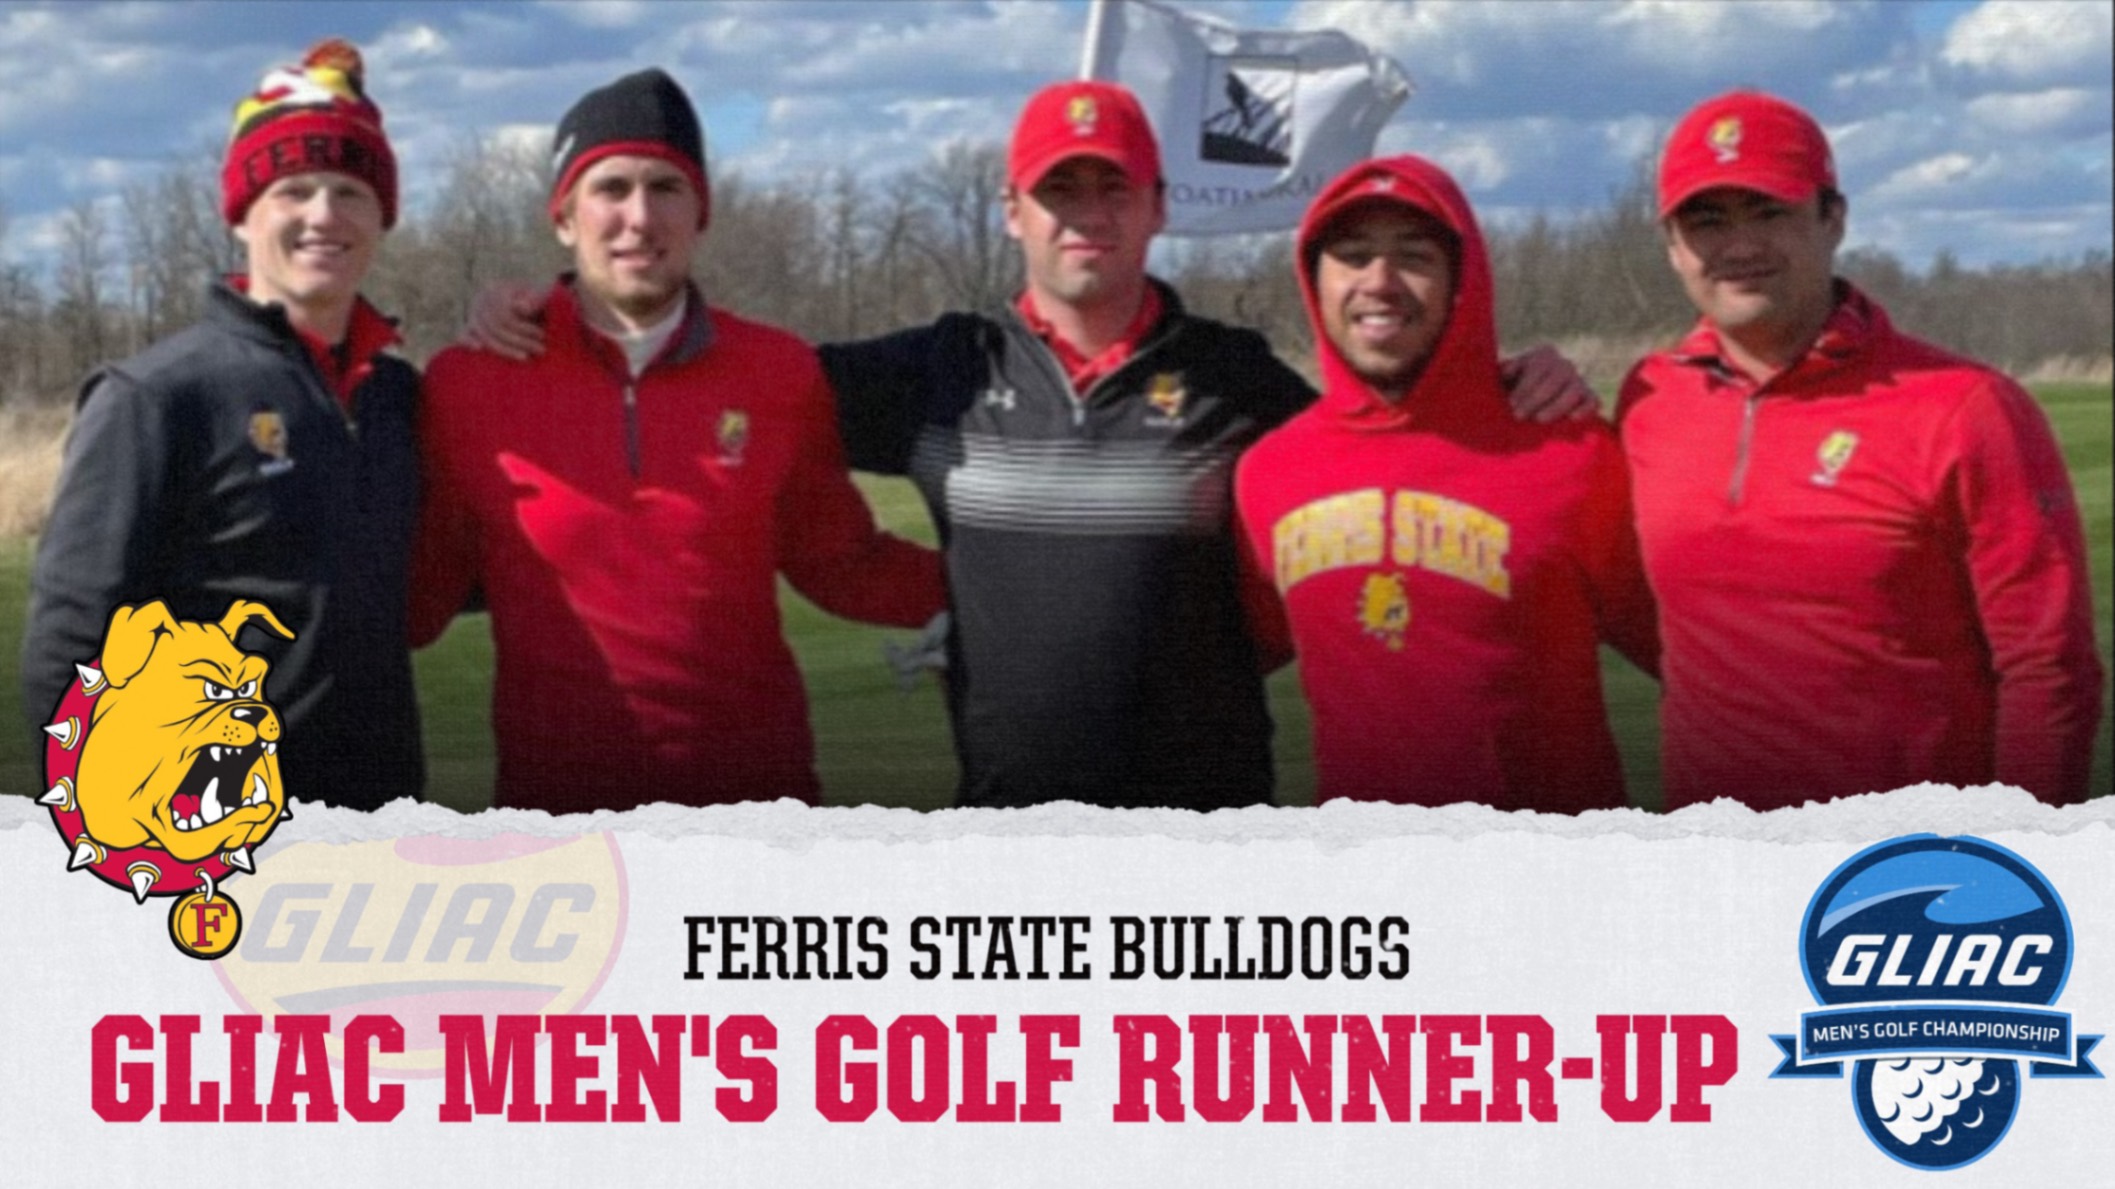 Ferris State Men's Golf Earns Runner-Up Honors At GLIAC Championships With Strong Sunday Performance